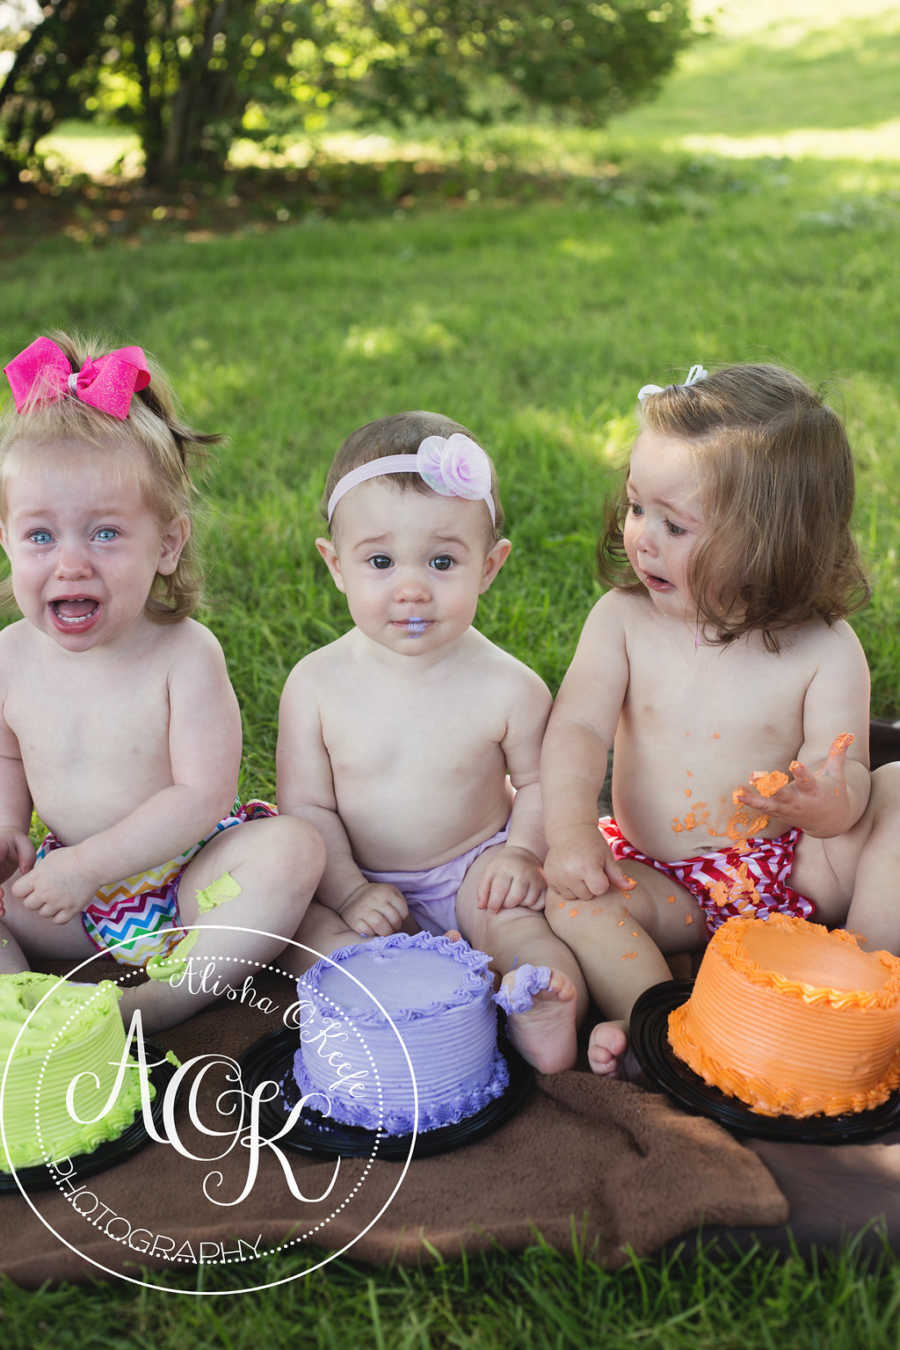 Three infants sit on ground crying with cake in front of them